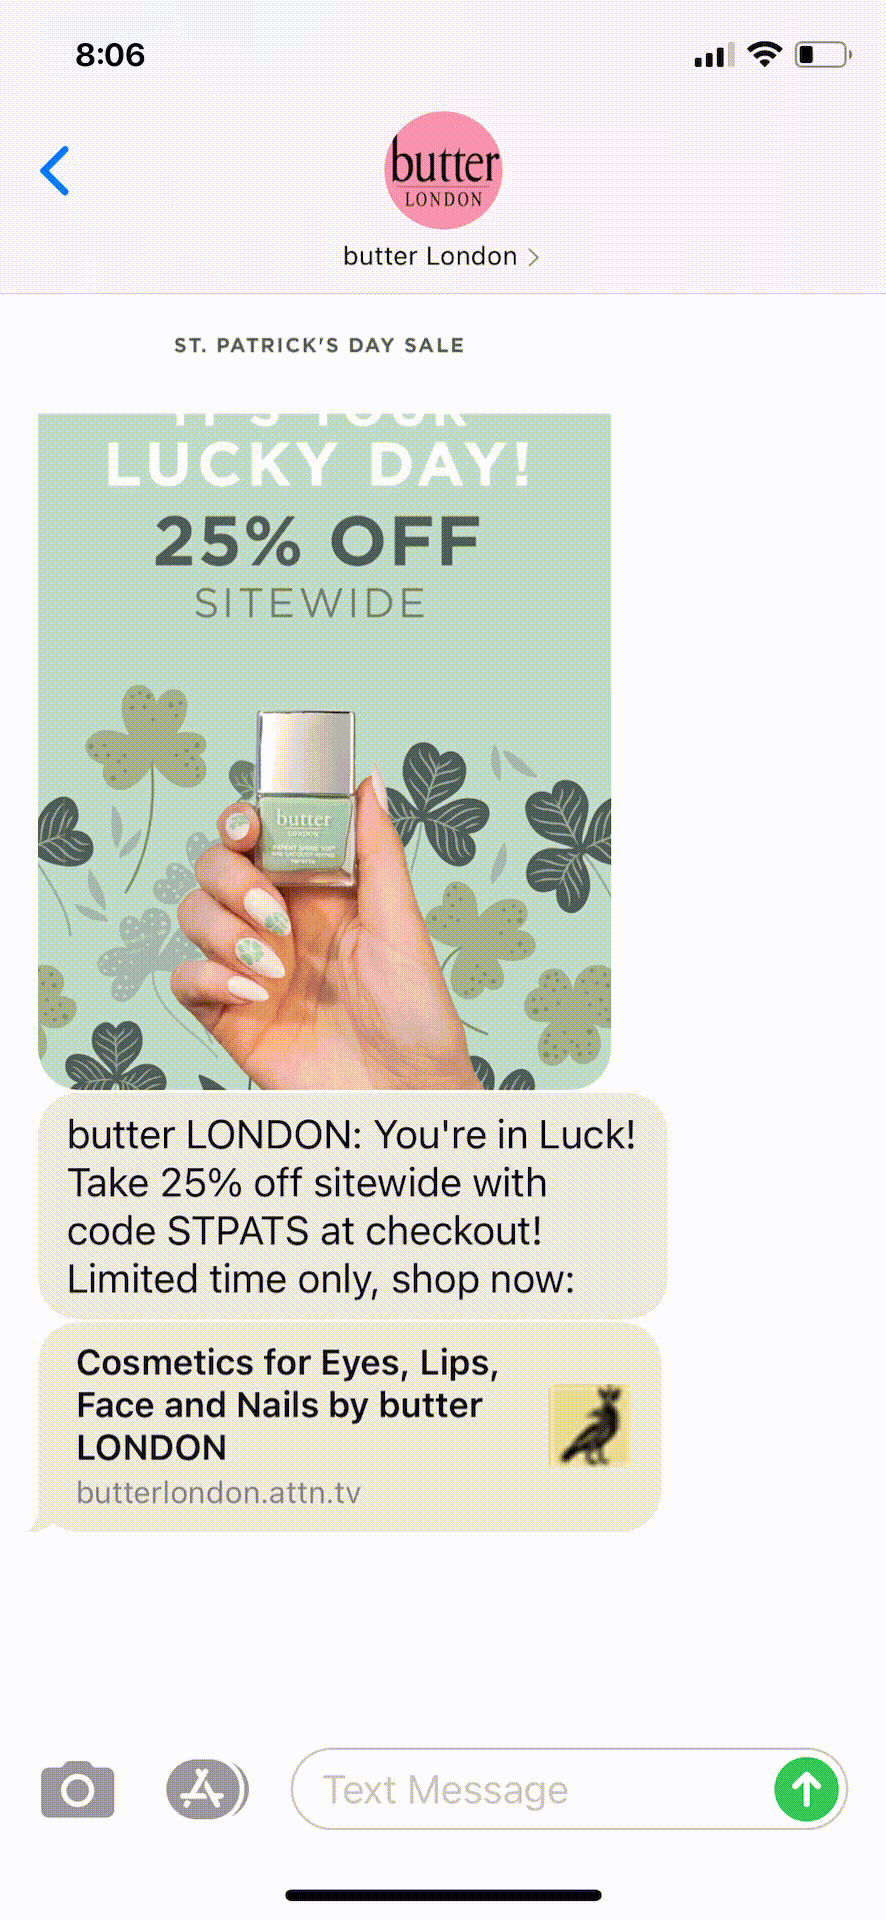 butter-London-Text-Message-Marketing-Example-03.15.2021